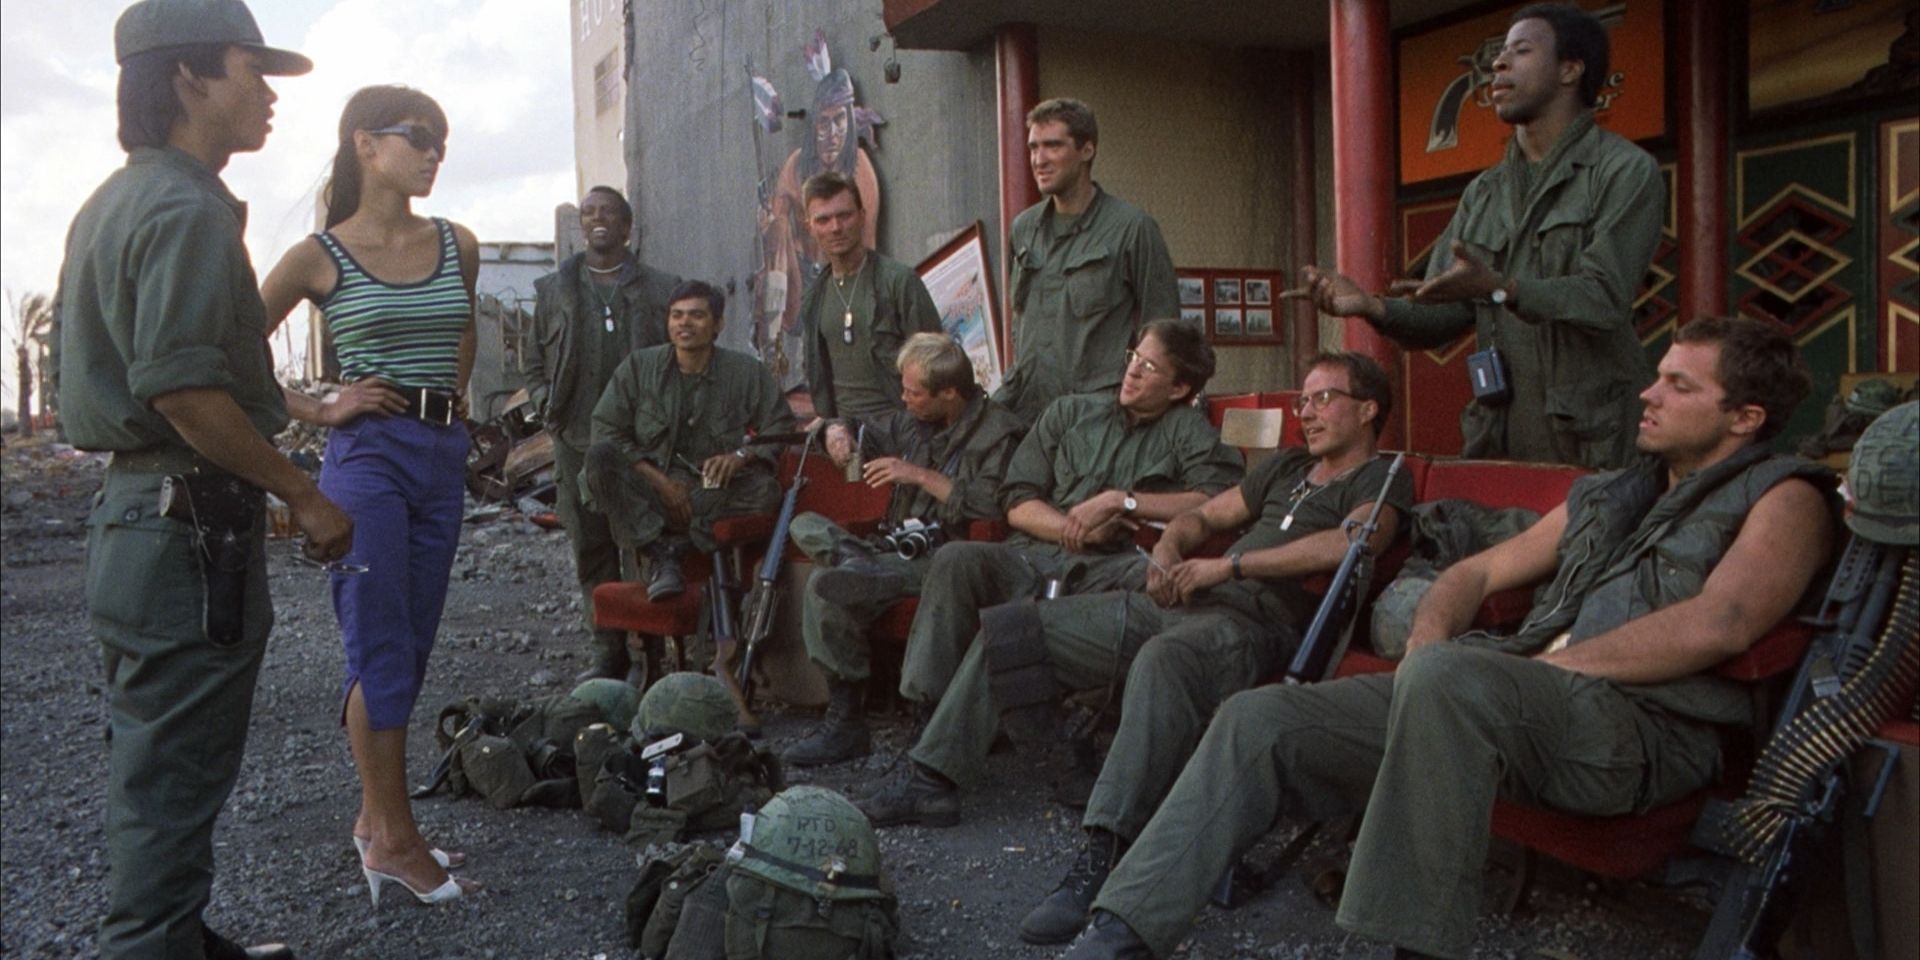 Stanley Kubrick 5 Reasons Why Full Metal Jacket Is His Best War Movie (& 5 Why Paths Of Glory Is A Close Second)